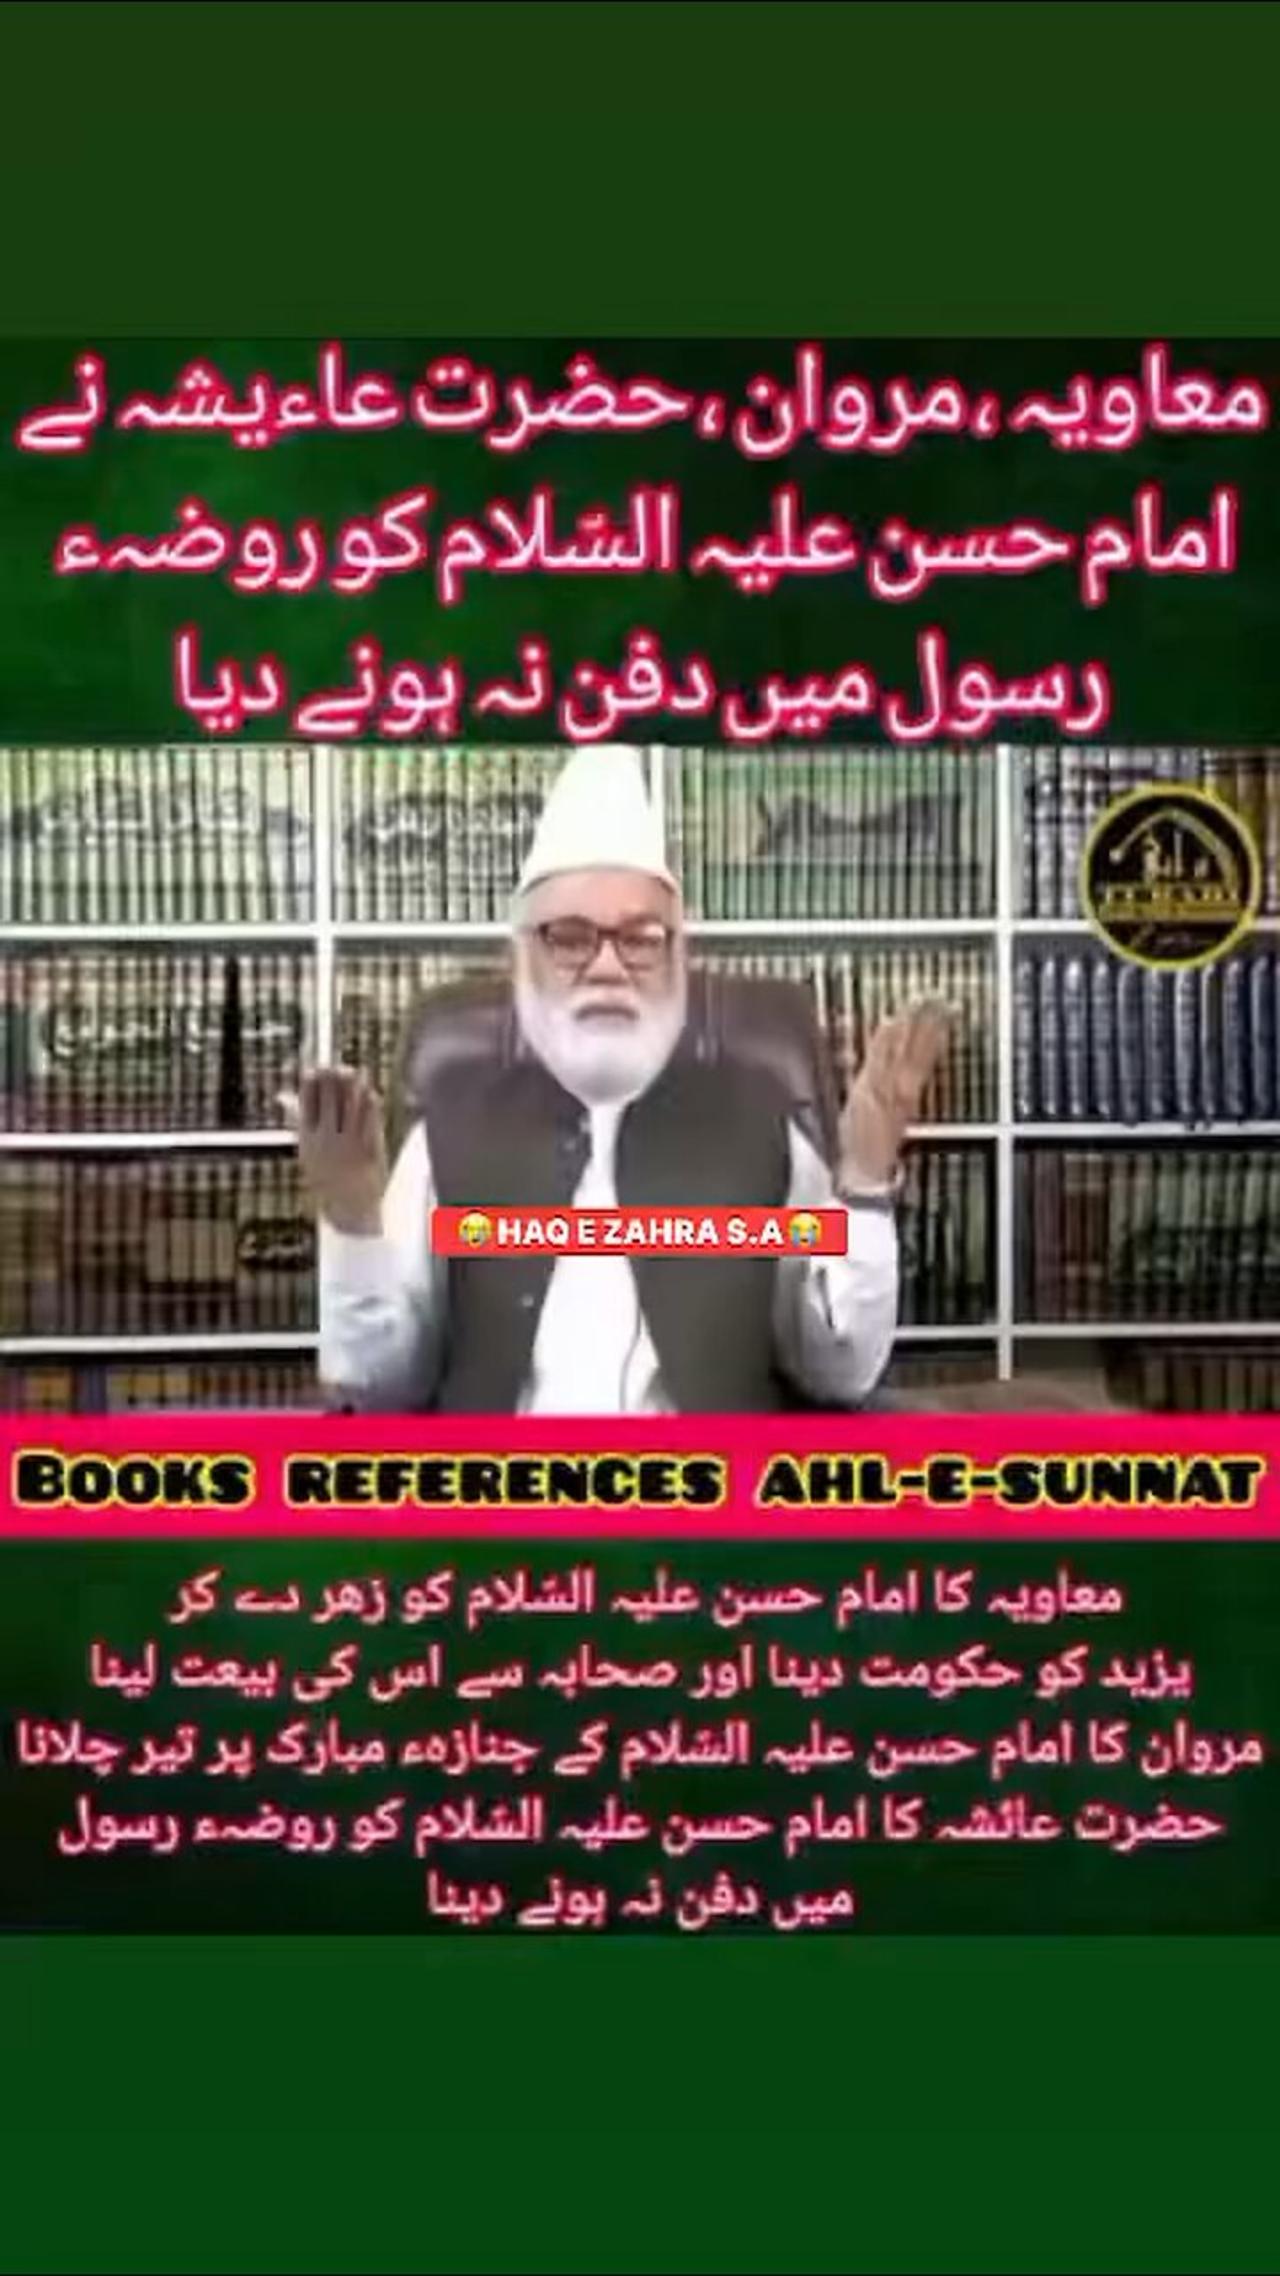 history of Ahl e bait About Imam Hussain